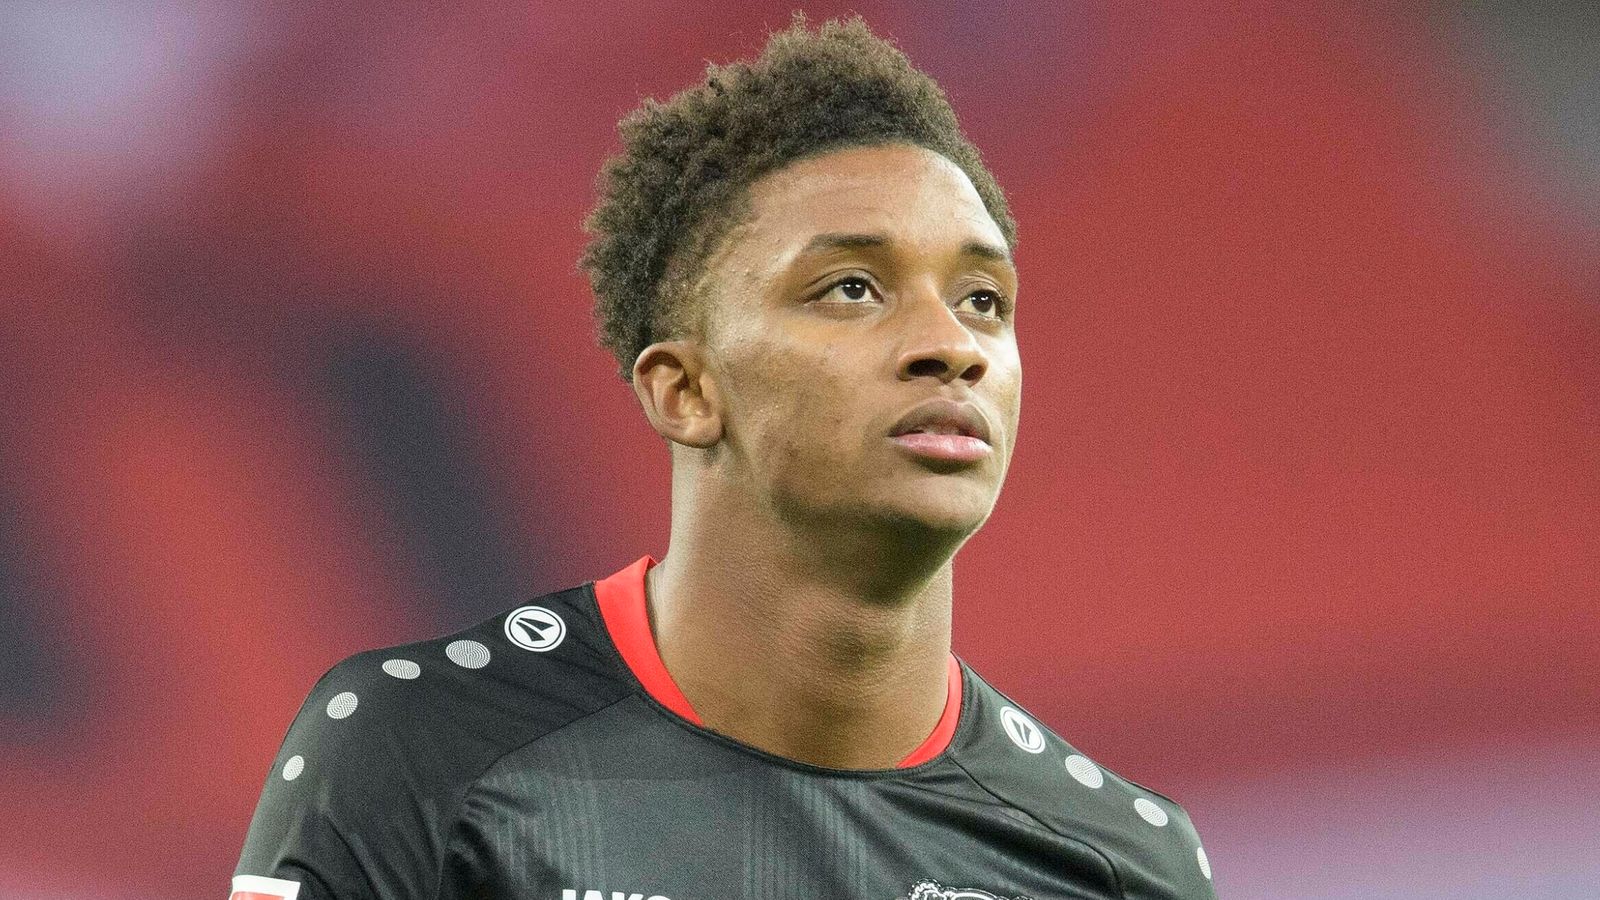 Everton transfer news: Demarai Gray arrives in Florida for medical ahead of £1.6m move from Bayer Leverkusen